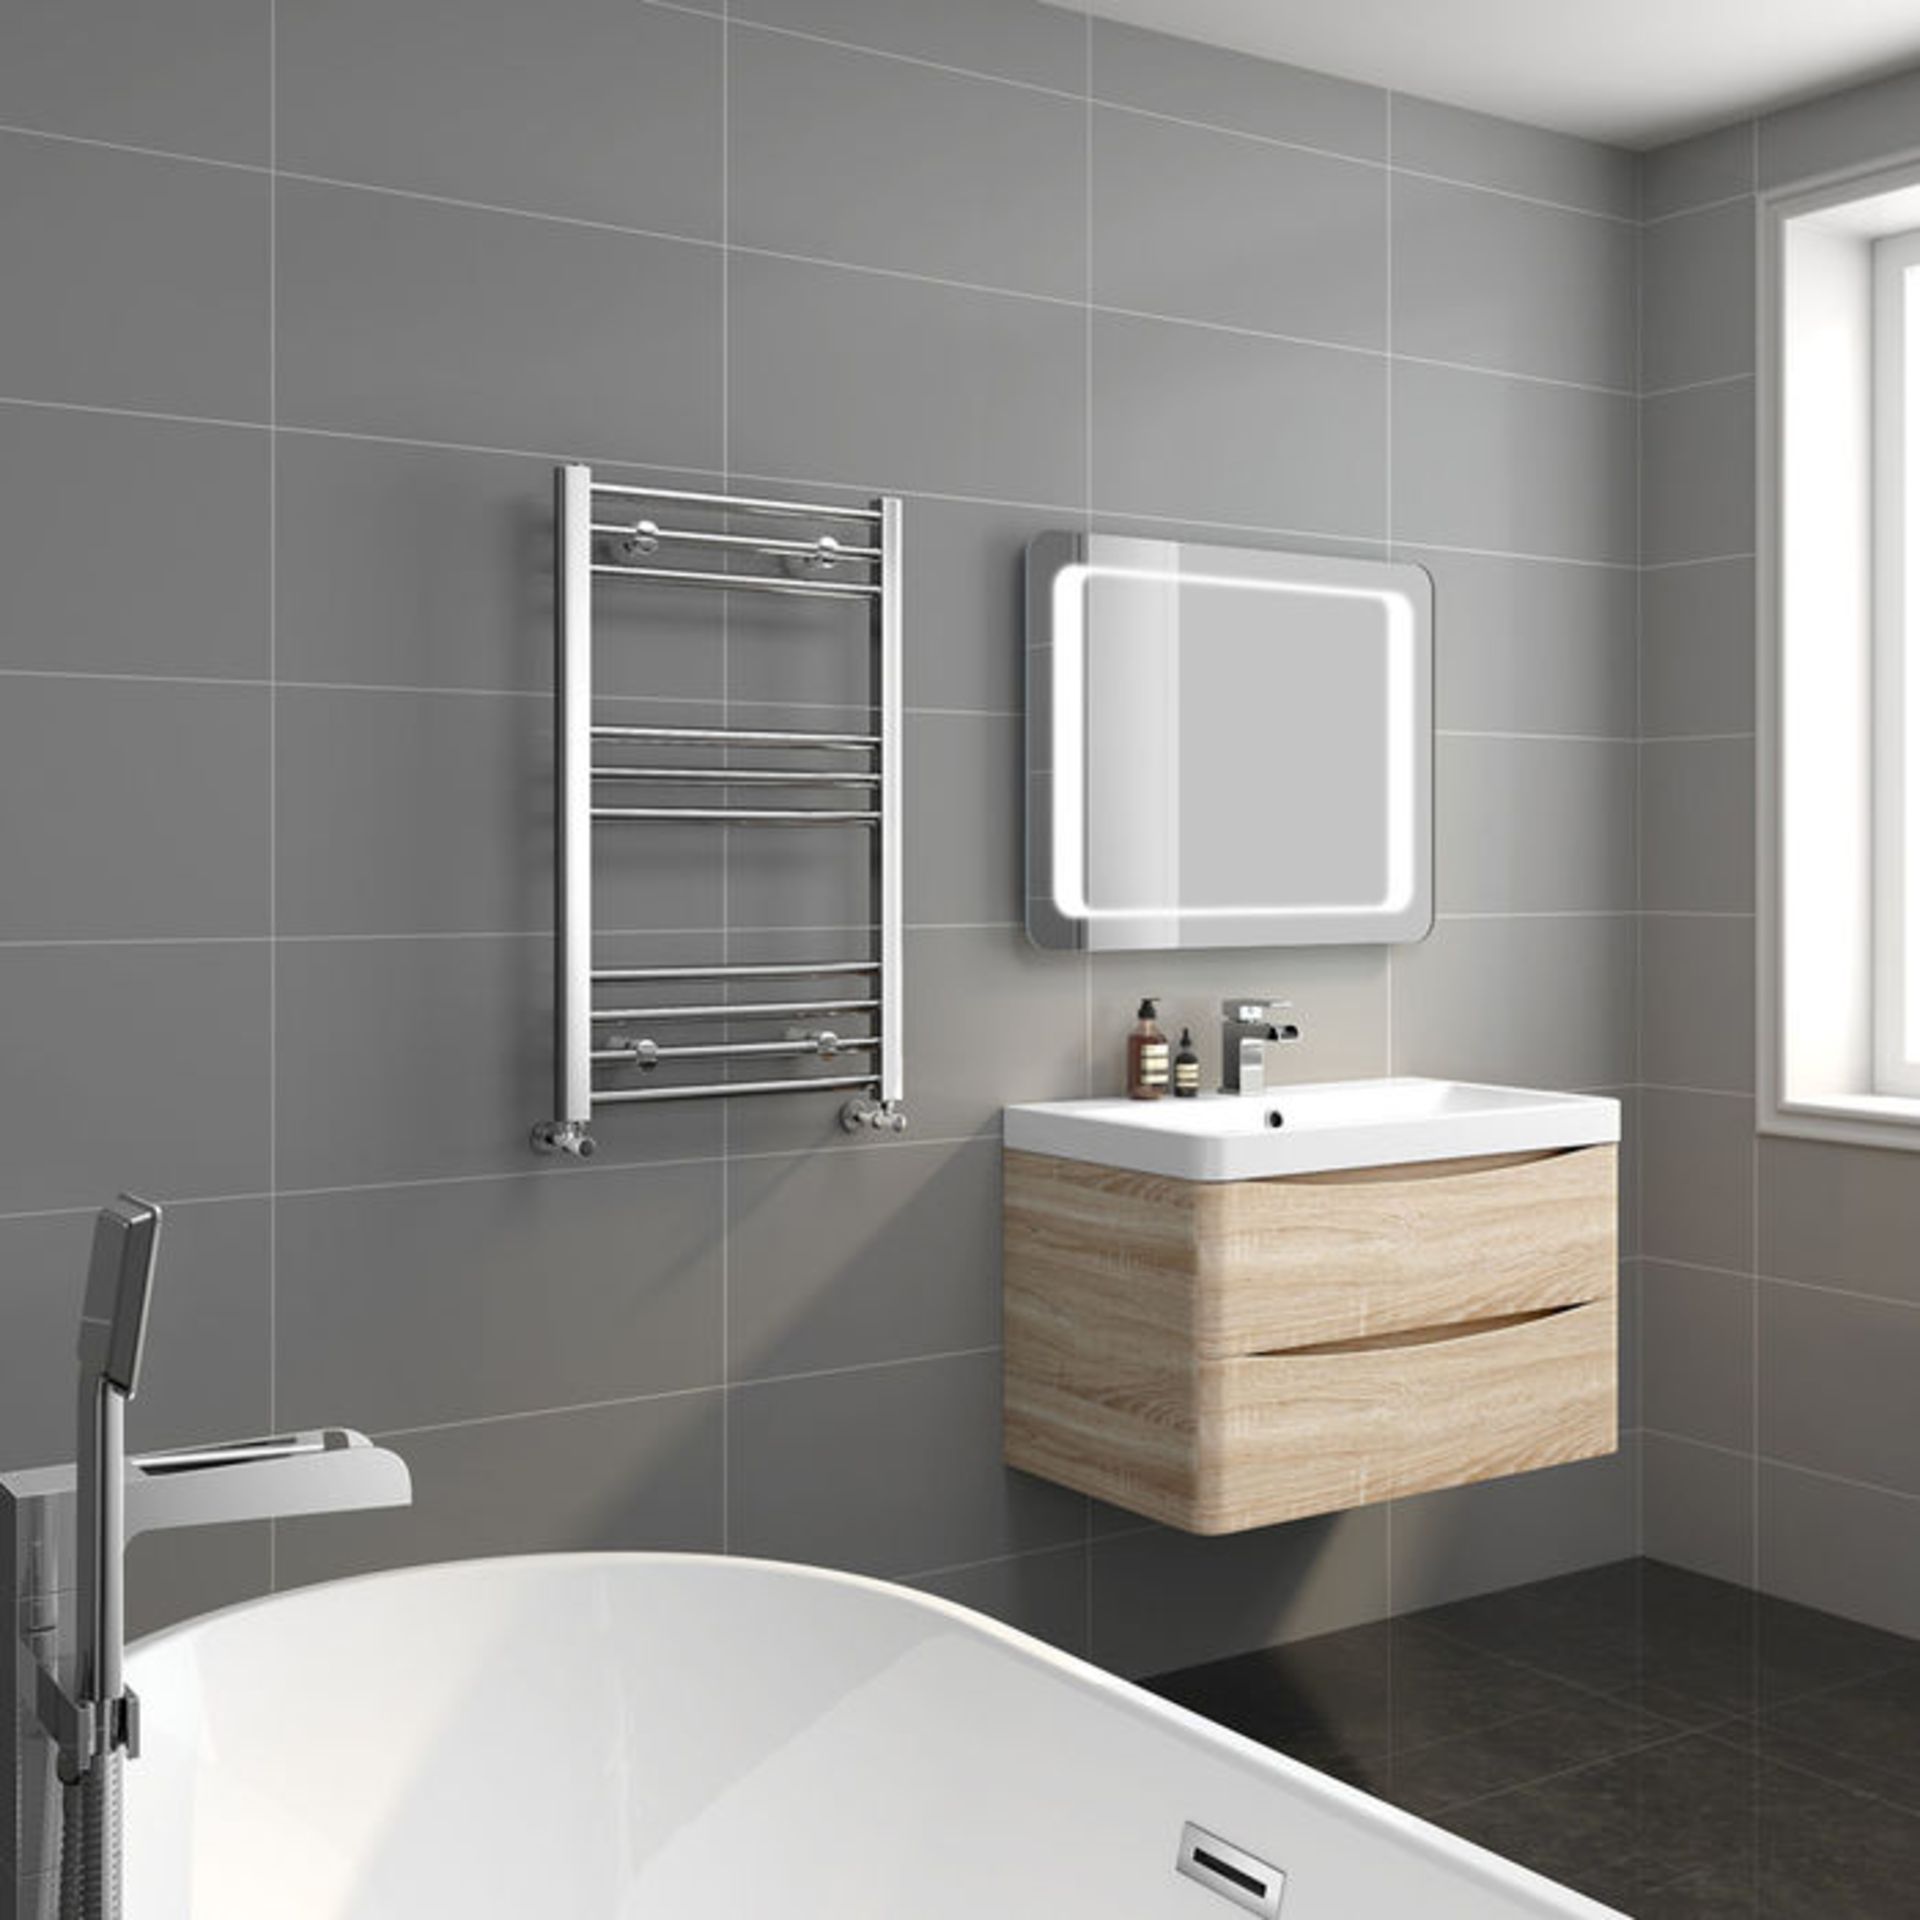 (H44) 800x500mm - 20mm Tubes - Chrome Heated Straight Rail Ladder Towel Radiator Low carbon steel - Image 2 of 3